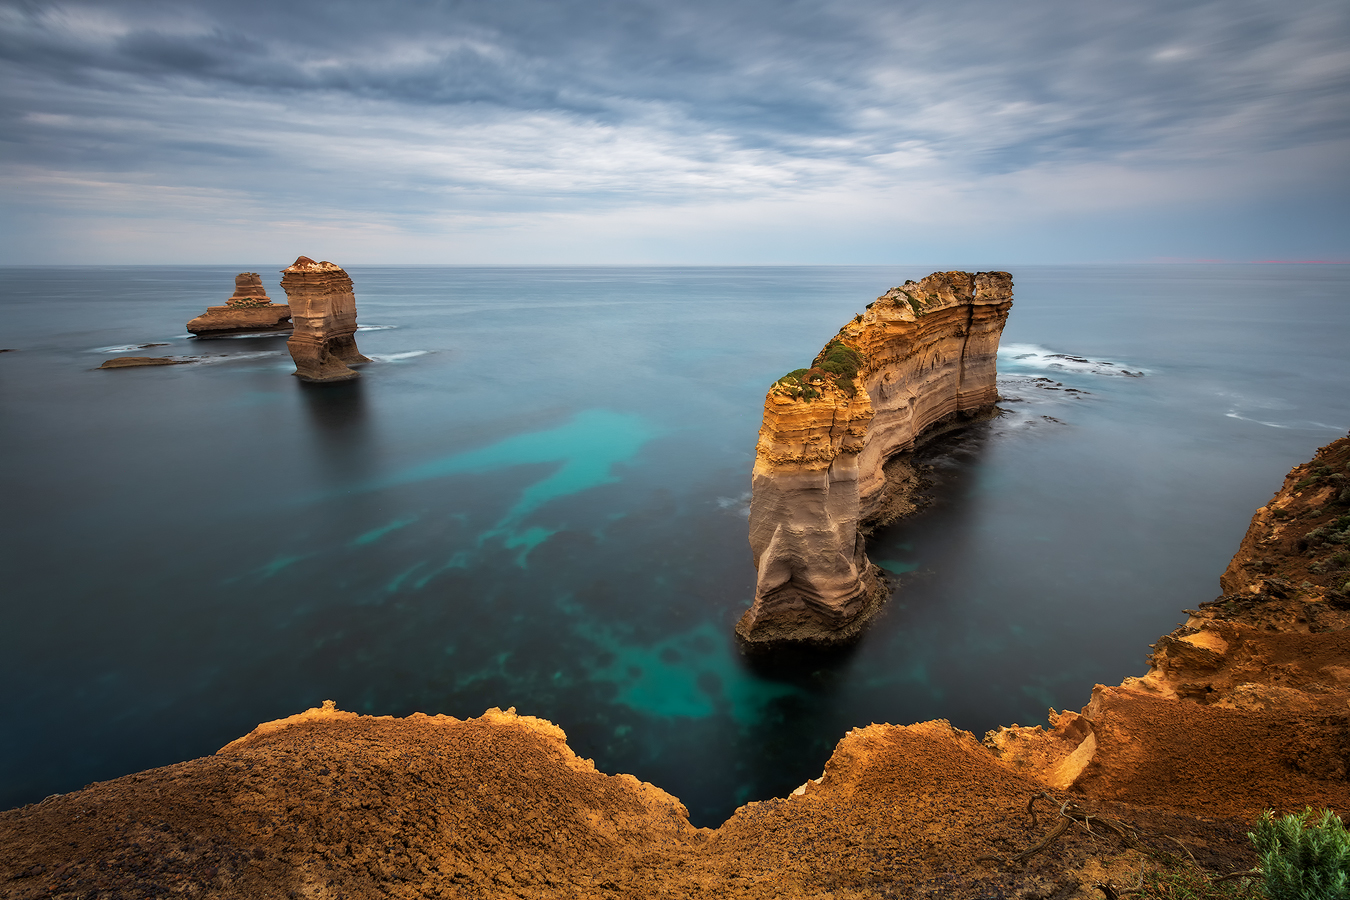 Razorback Sunset - Loch Ard Gorge, Great Ocean Road, Australia | Holiday with We Are Raw Photography Tours